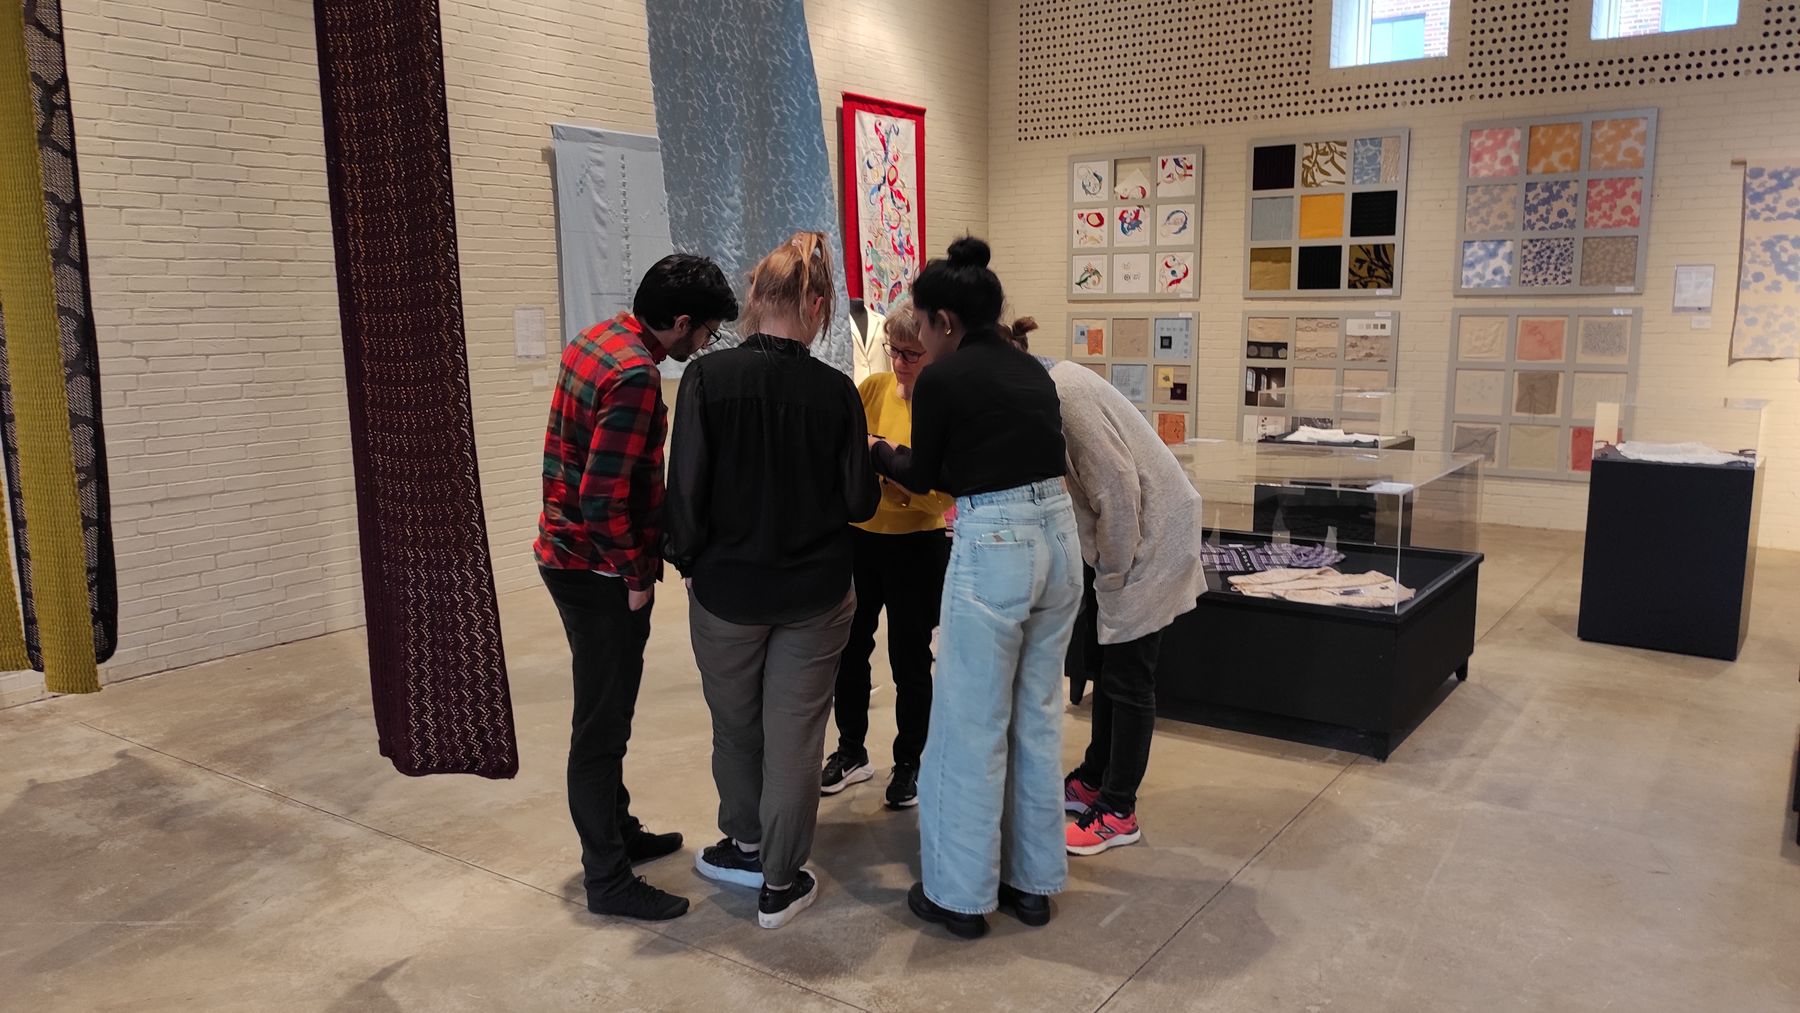 Visit to the Textile Museum of Herning. Photo by Aalto University, Giulnara Launonen